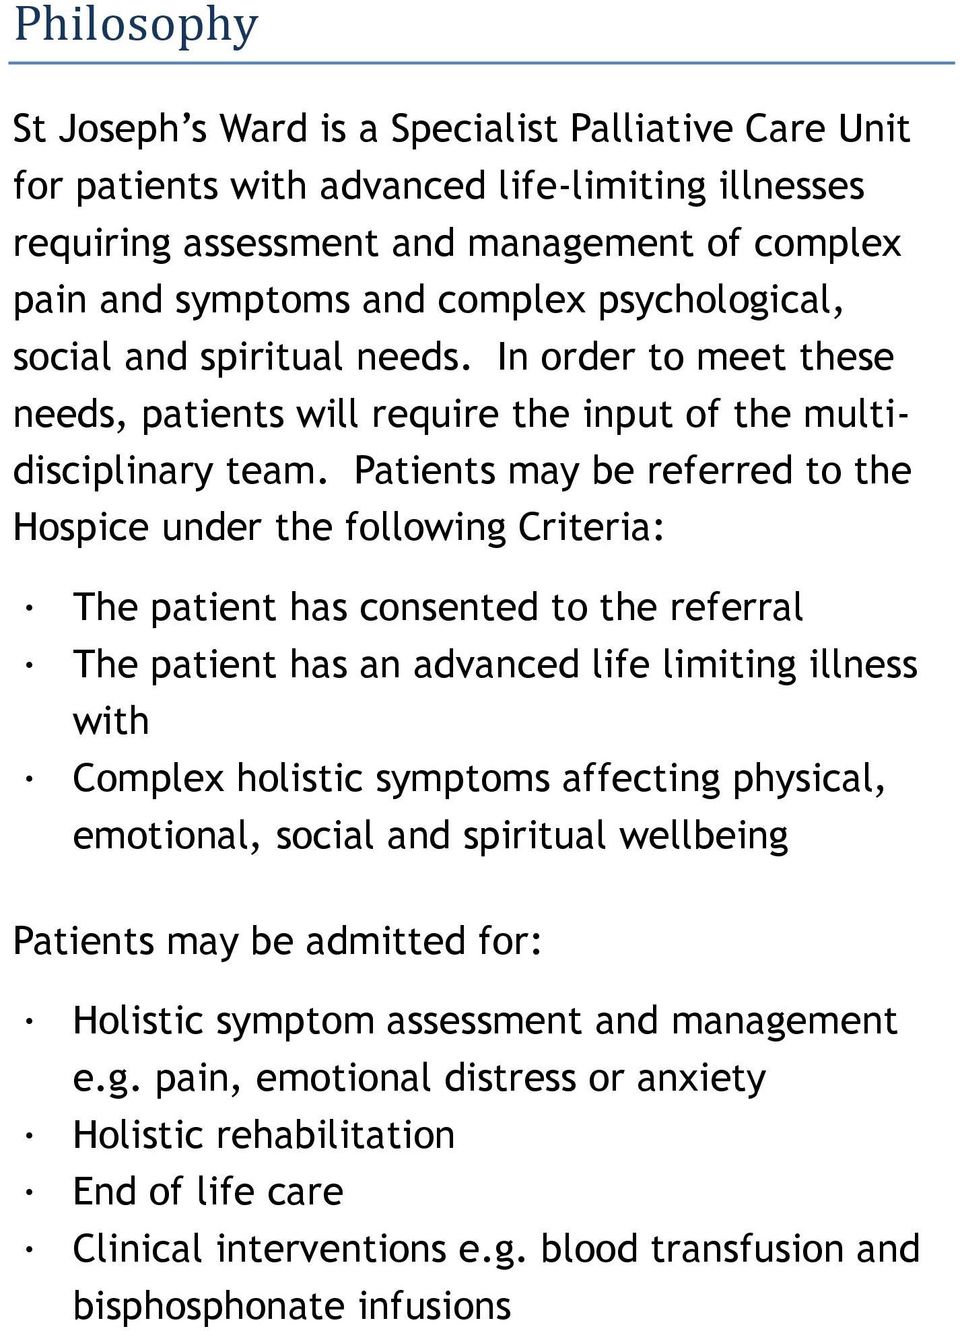 Patients may be referred to the Hospice under the following Criteria: The patient has consented to the referral The patient has an advanced life limiting illness with Complex holistic symptoms